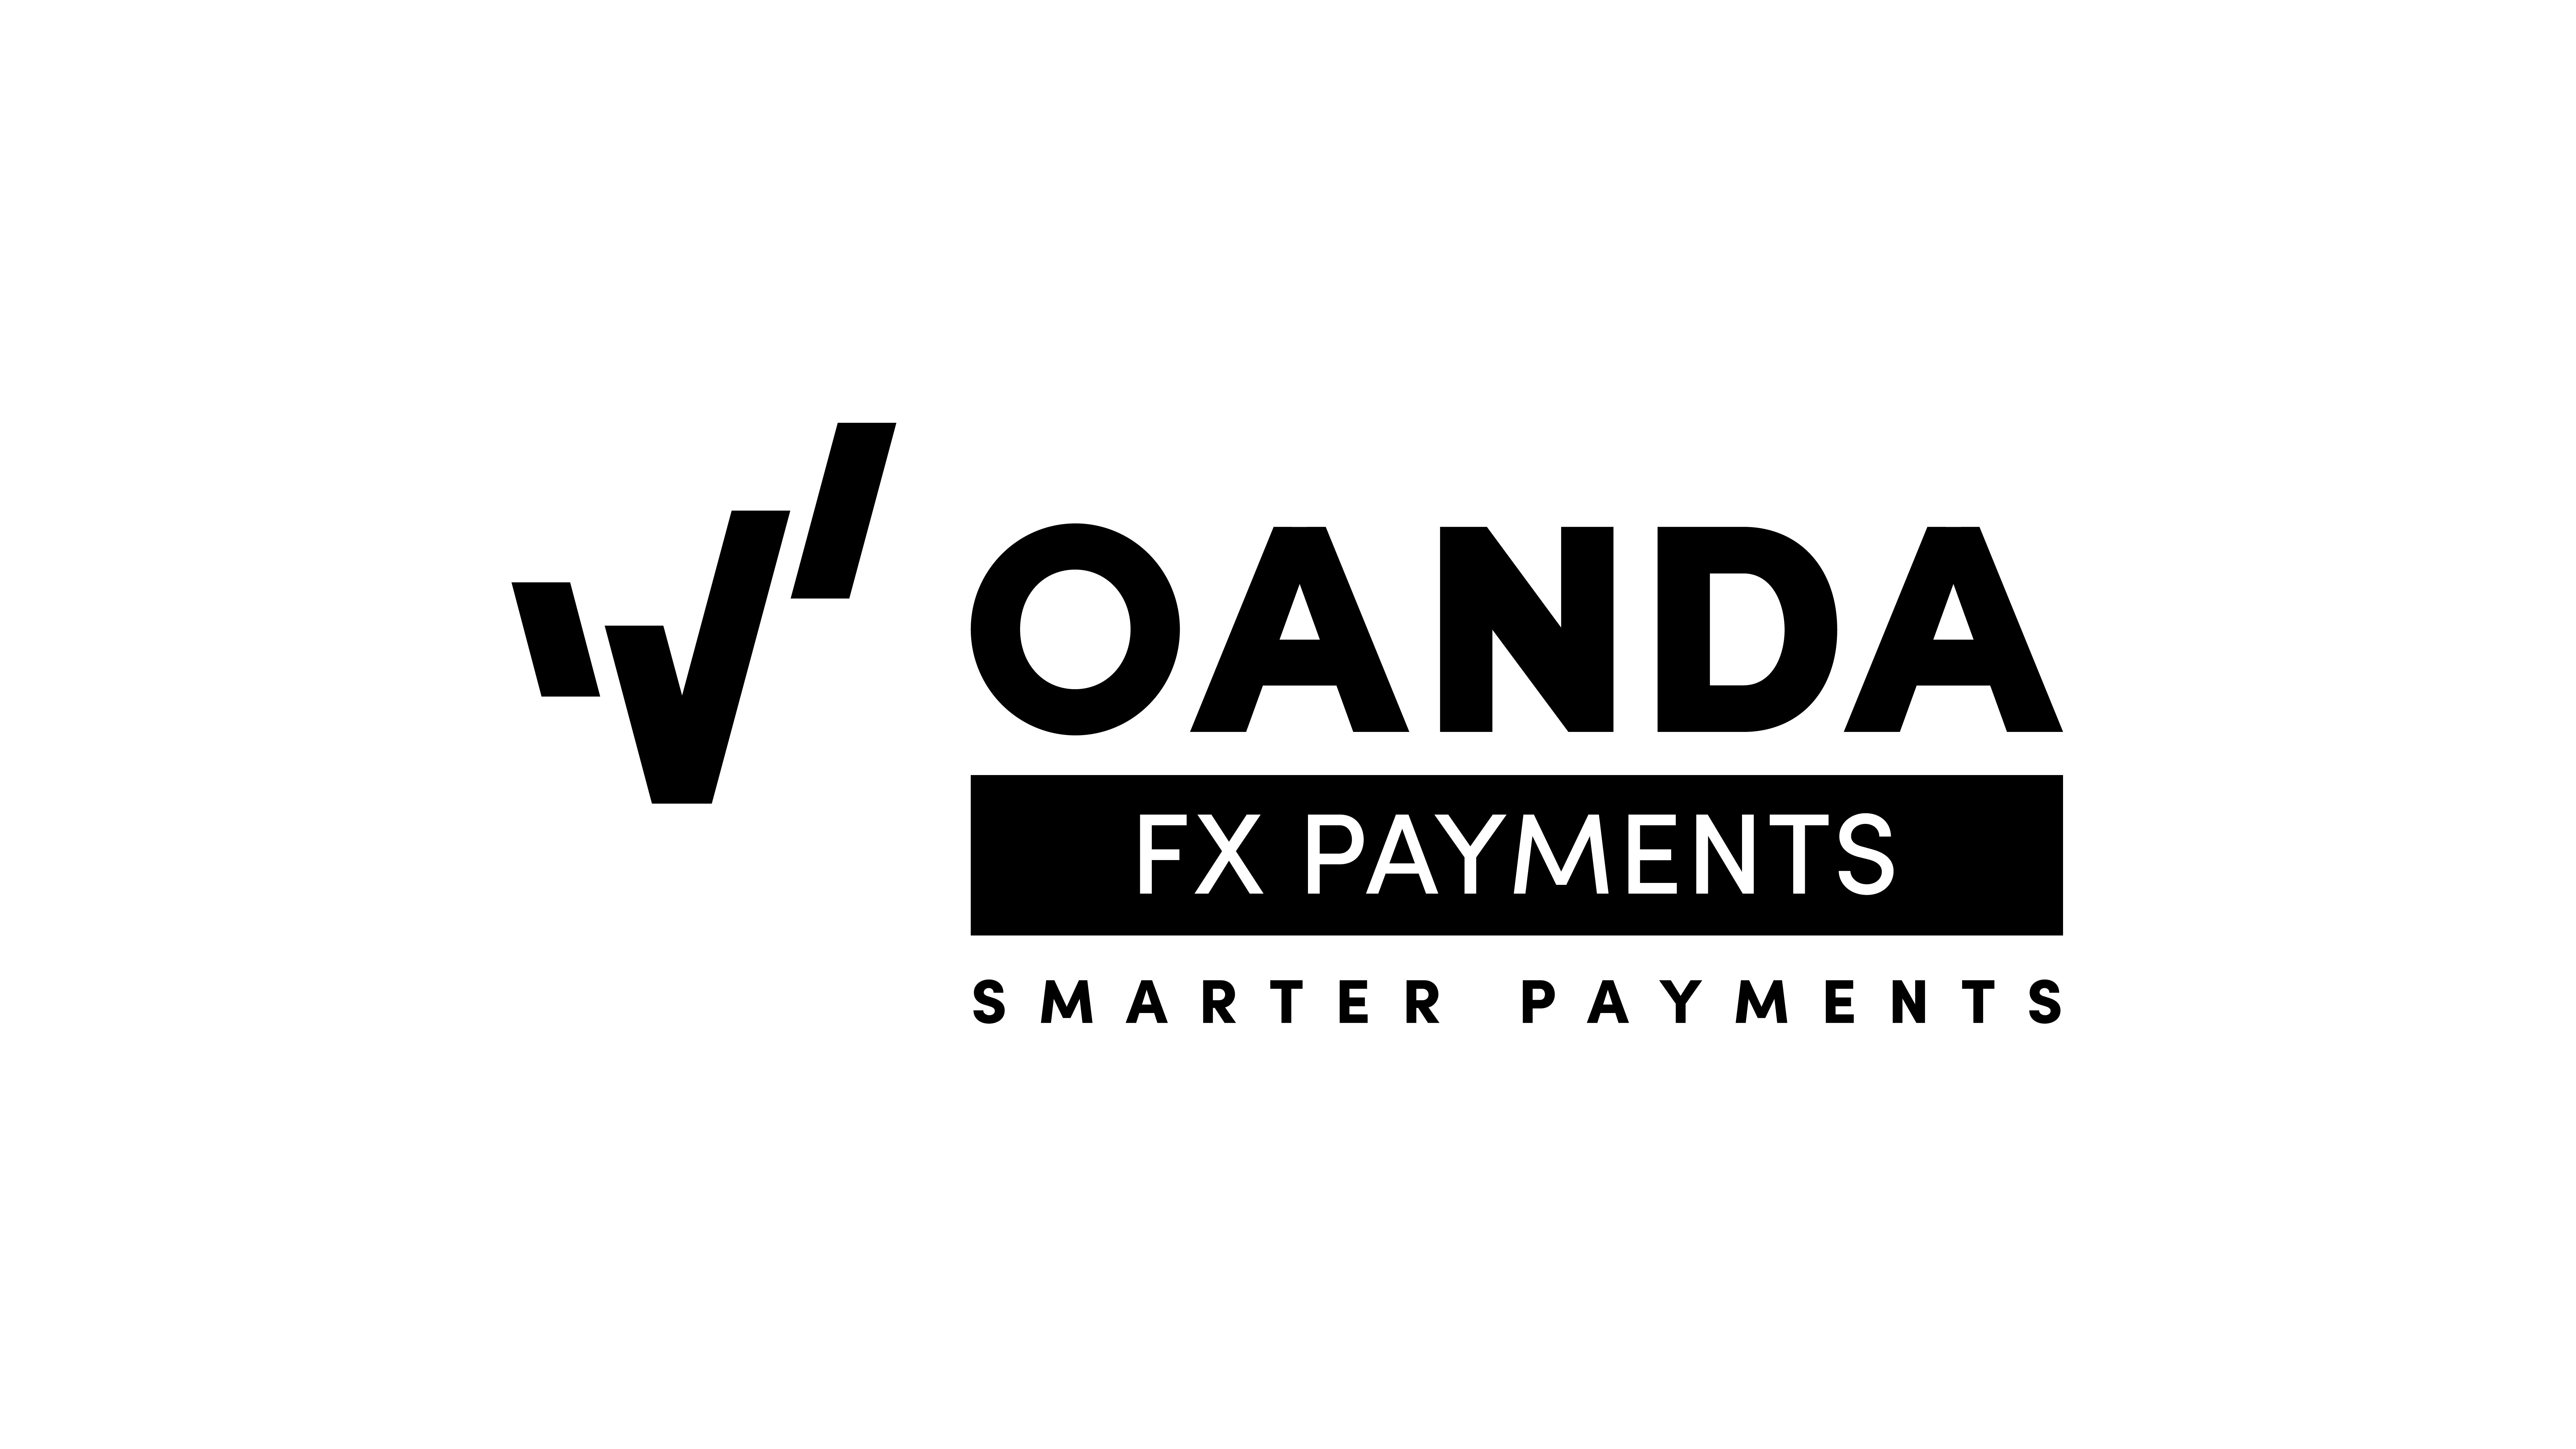  OANDA FX PAYMENTS SMARTER PAYMENTS